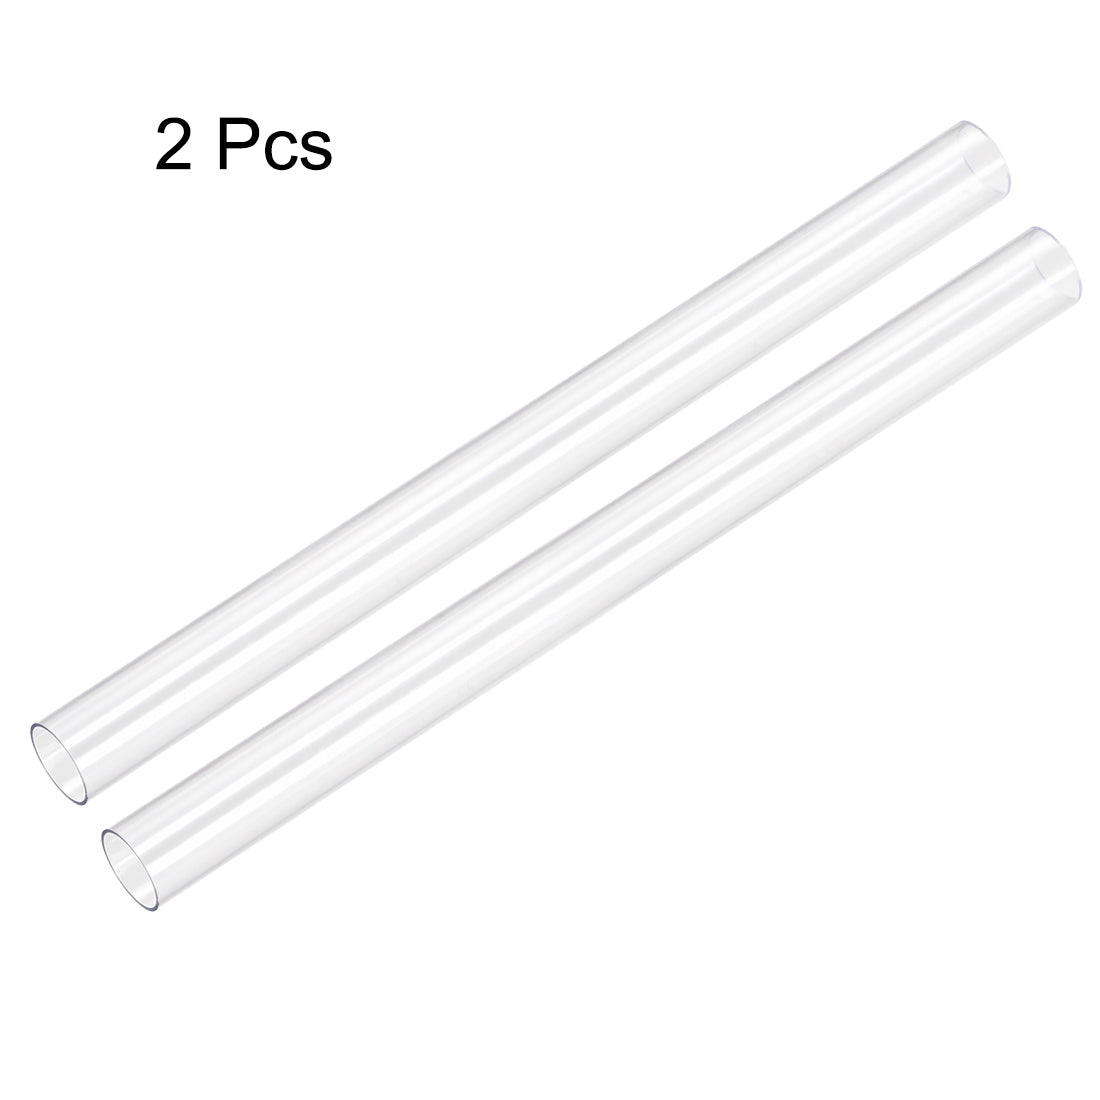 uxcell Uxcell PC Rigid Round Clear Tubing, 18mm (0.71 Inch) ID x 20mm (0.79 Inch) OD, 0.5M/1.64Ft Length 2pcs